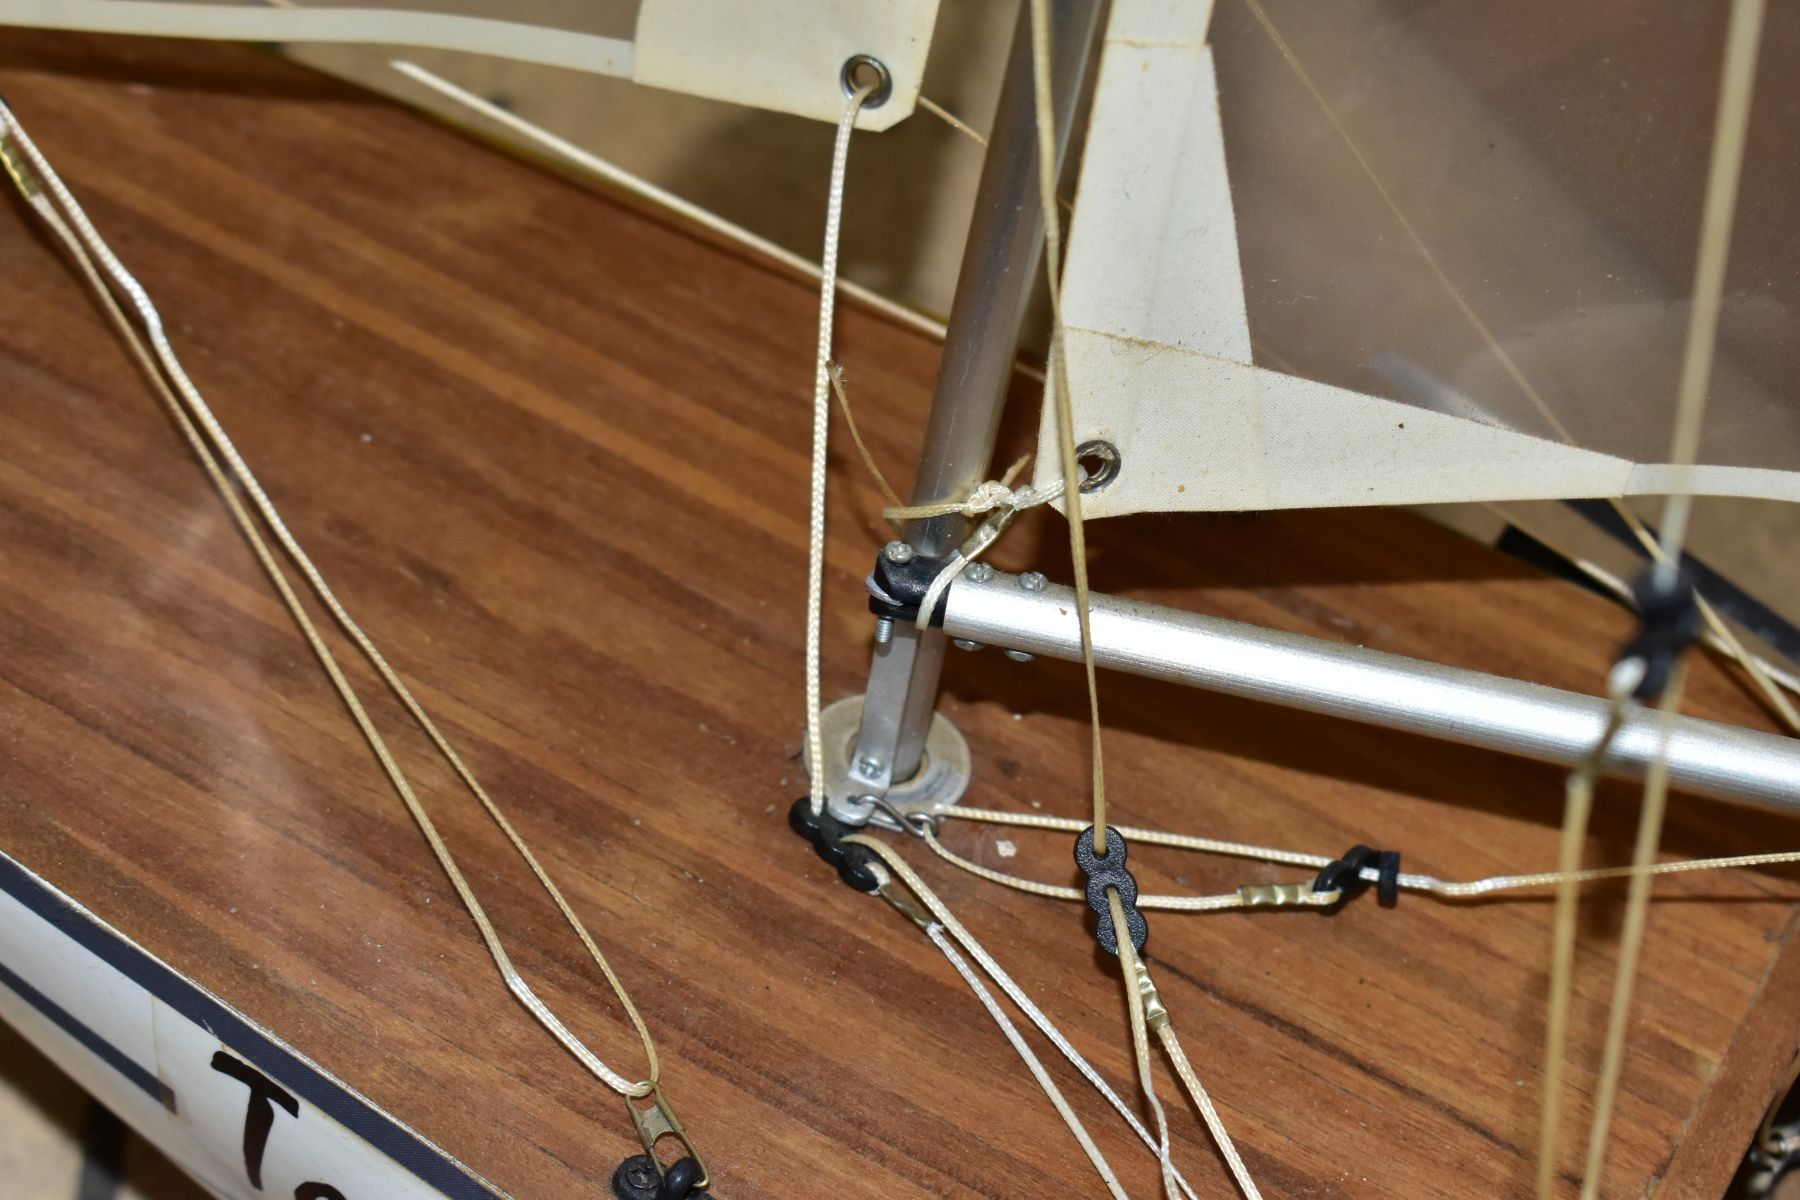 A SCRATCH BUILT MODEL YACHT, at full sail, the deck with rigging and clear sails, motor in hull, - Image 6 of 8